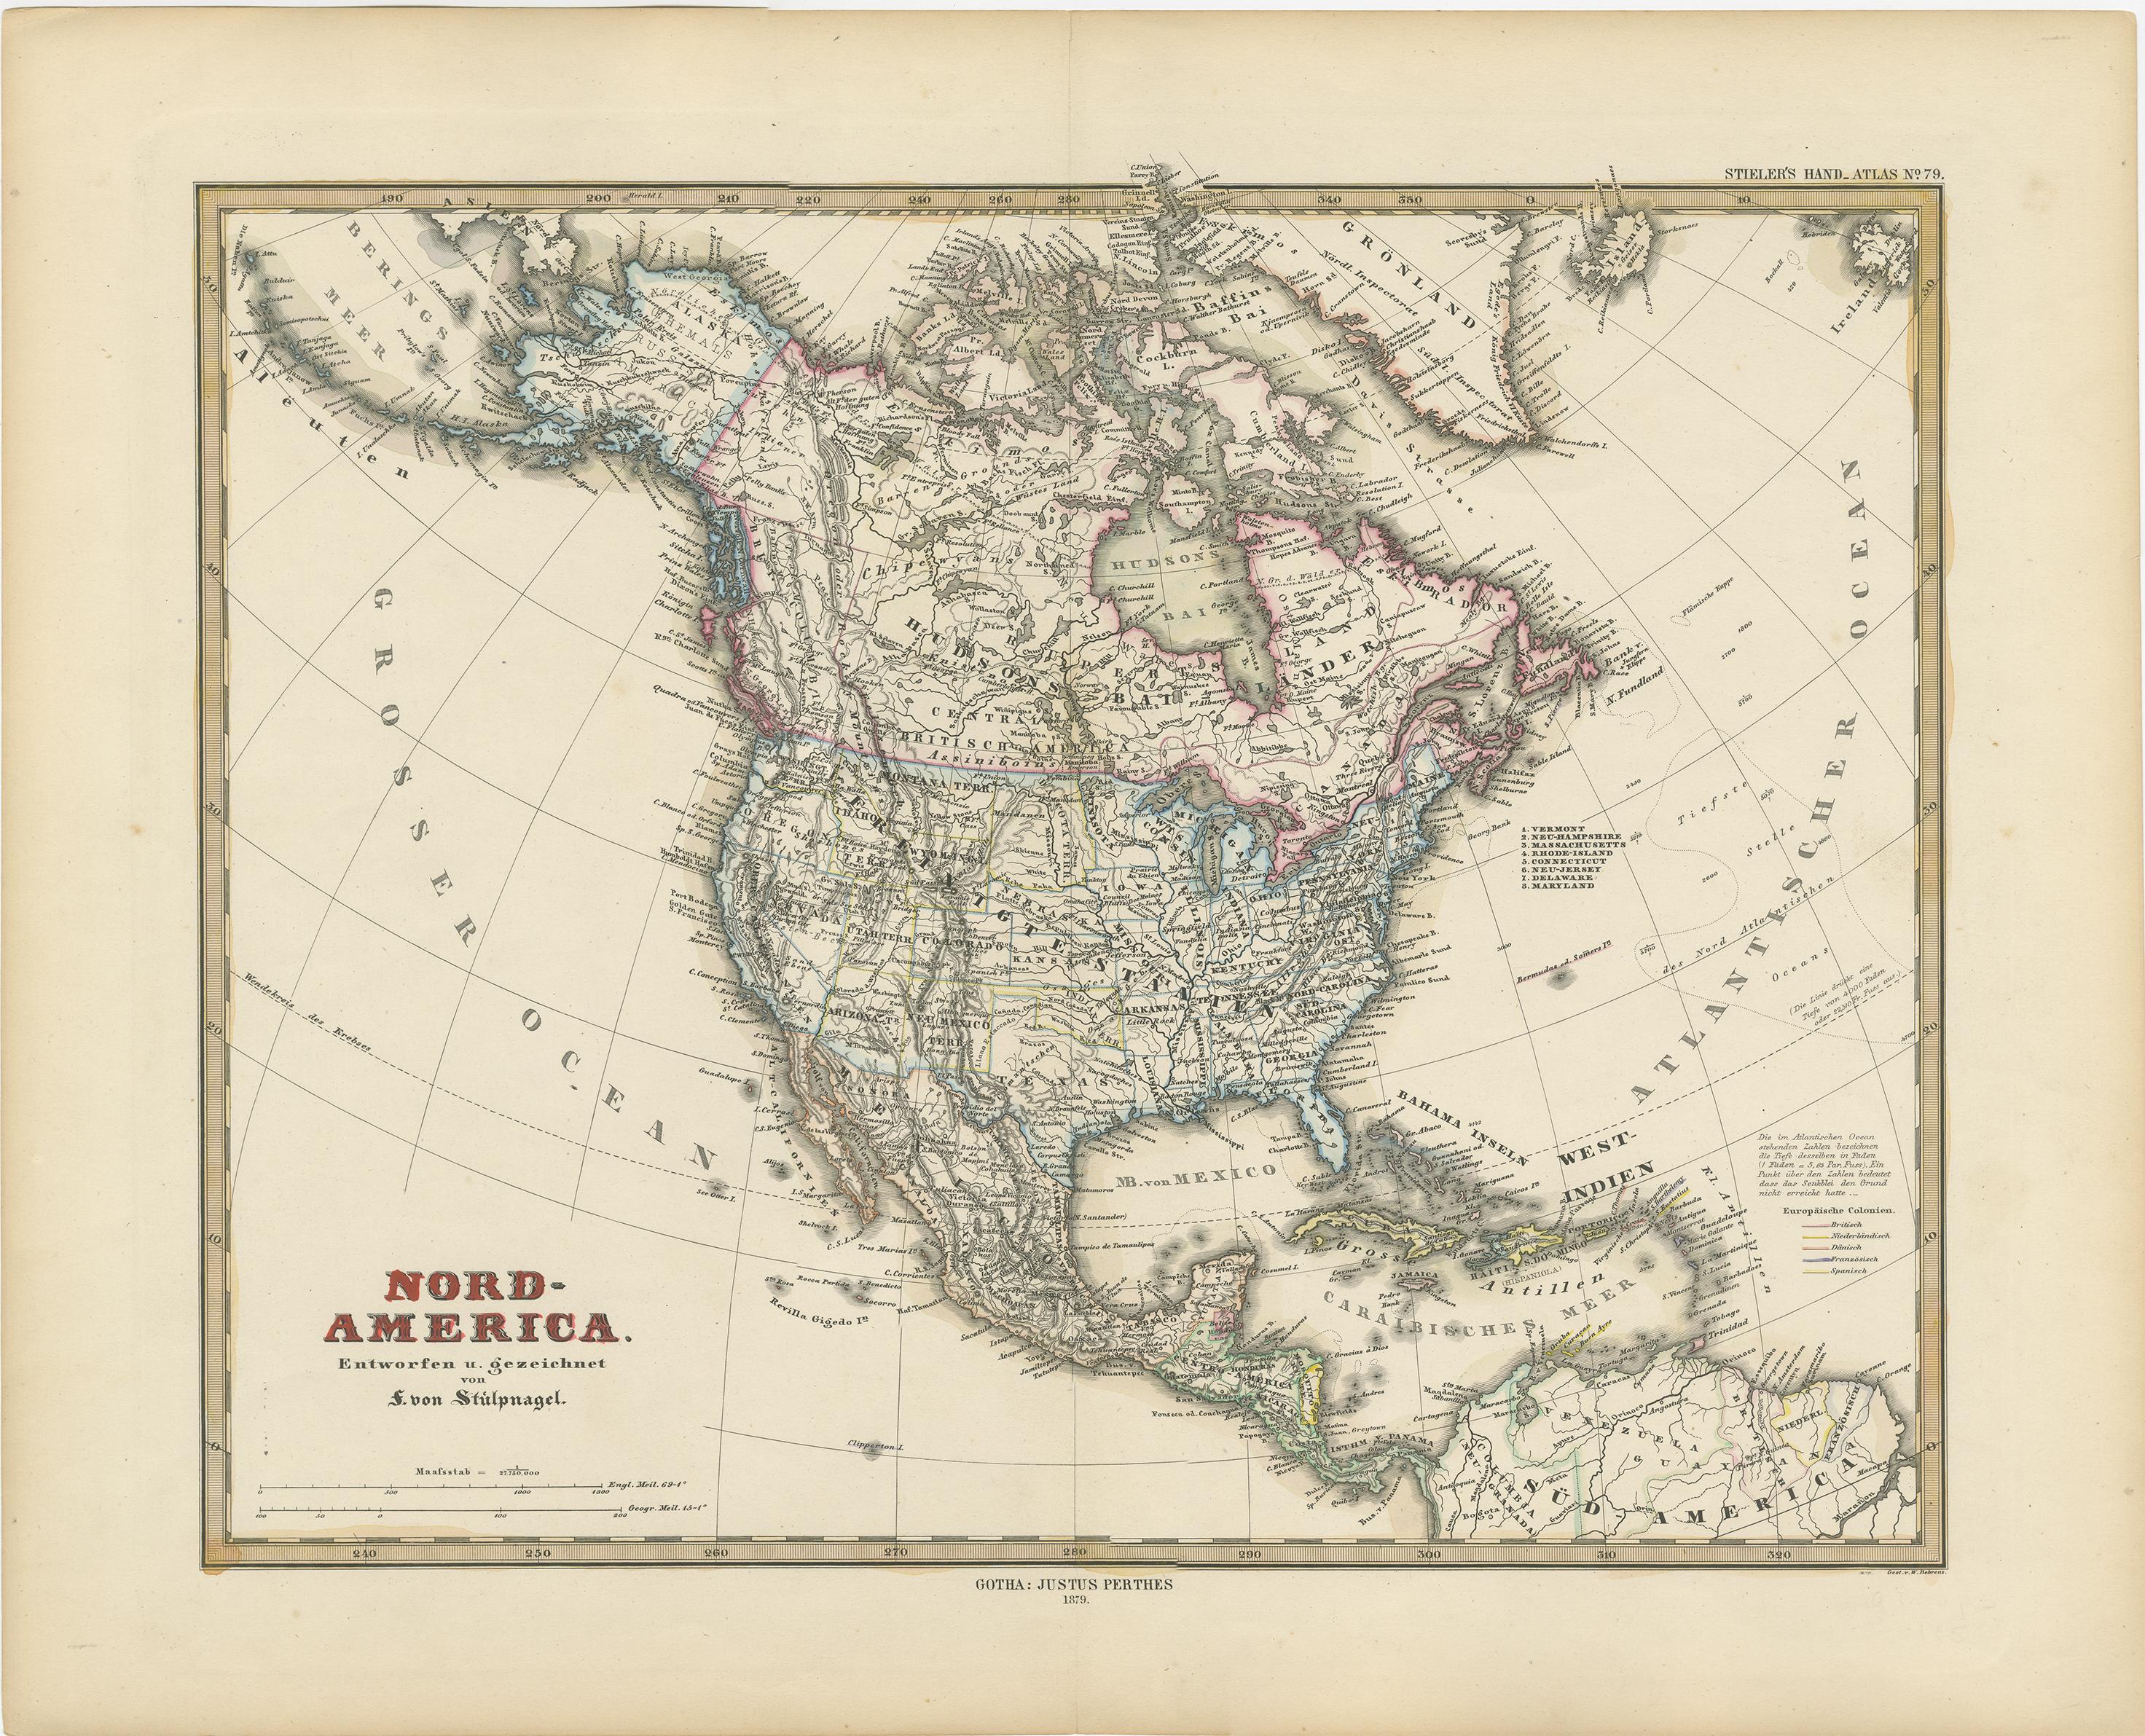 Original antique map titled 'Nord-America'. Old map of North America and the West Indies. 

This map originates from Stielers Handatlas, published circa 1879. Stielers Handatlas (after Adolf Stieler, 1775–1836), formally titled Hand-Atlas über